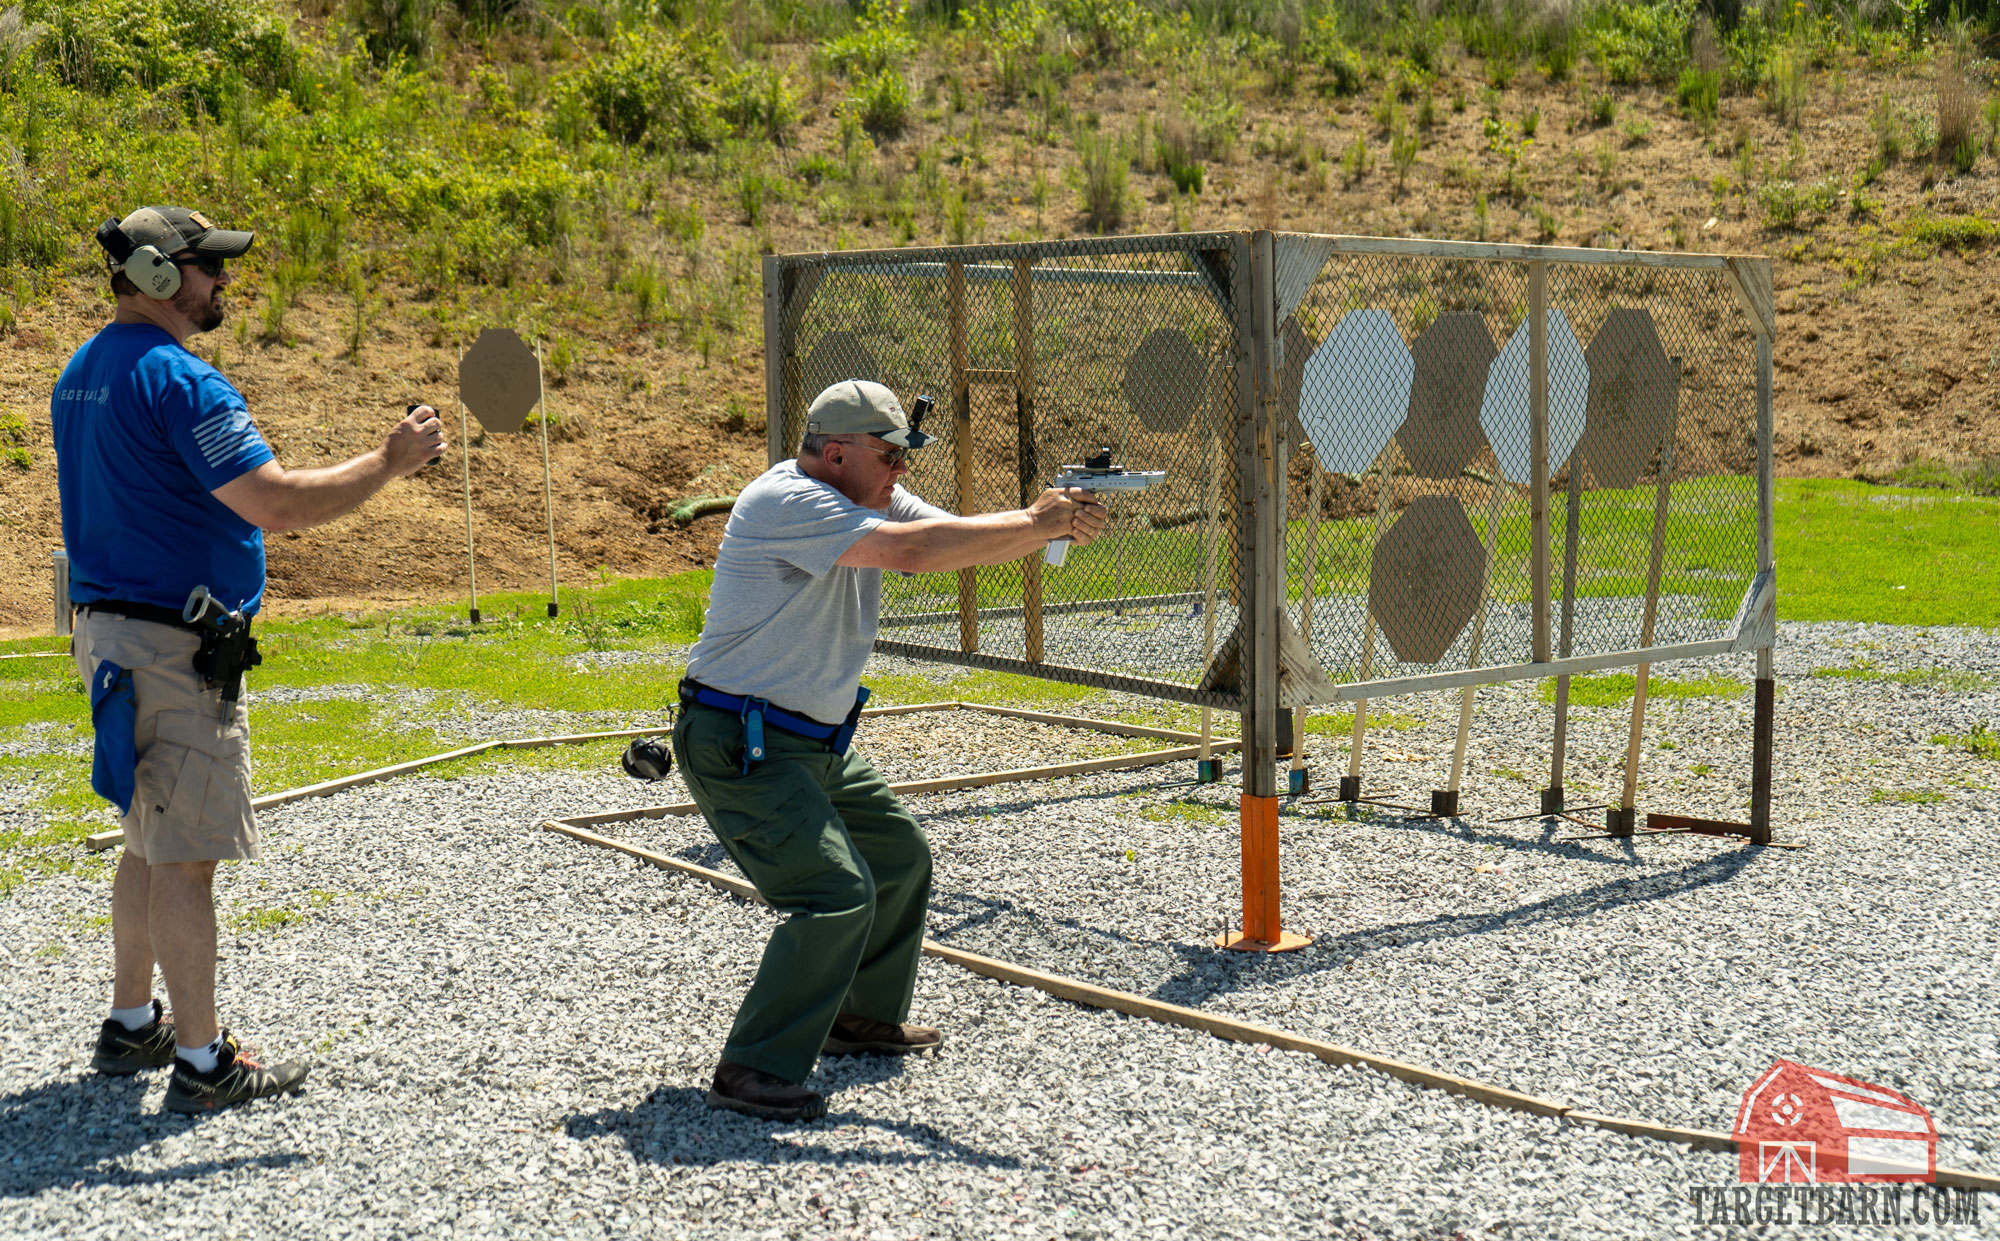 a man competing in a pistol shooting competition